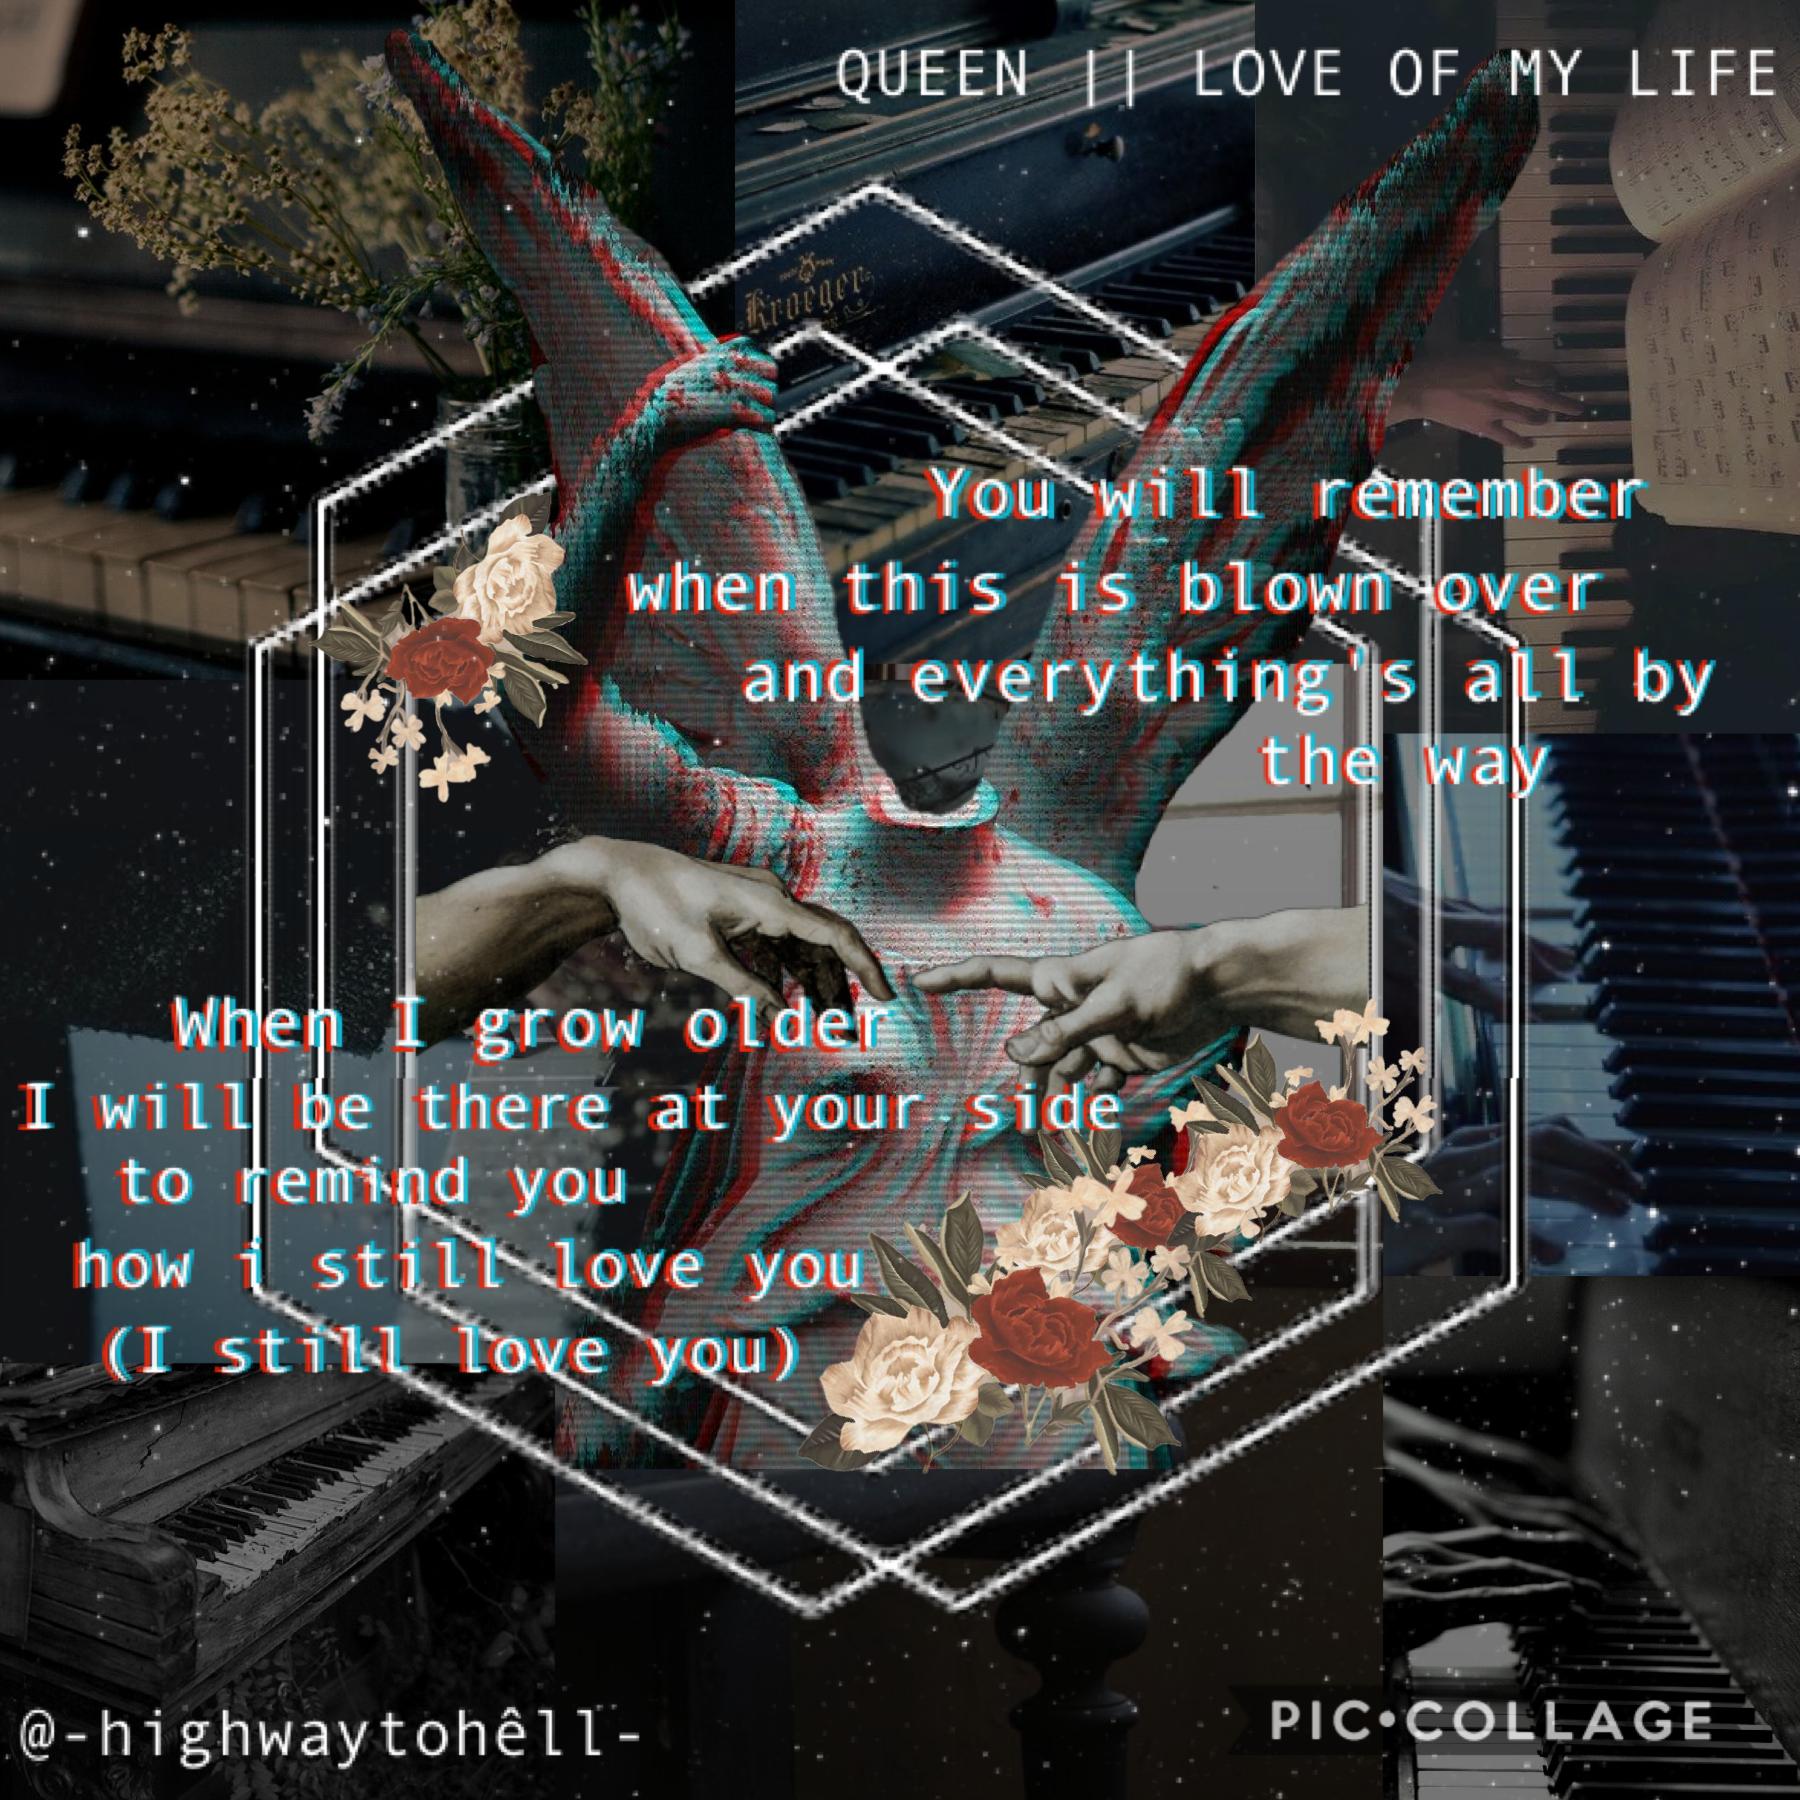 QUEEN || LOVE OF MY LIFE

i spend way too much time on this app nowadays. it's becoming a problem. 

also i think this might be my favorite collage i've made. i really like how it turned out.